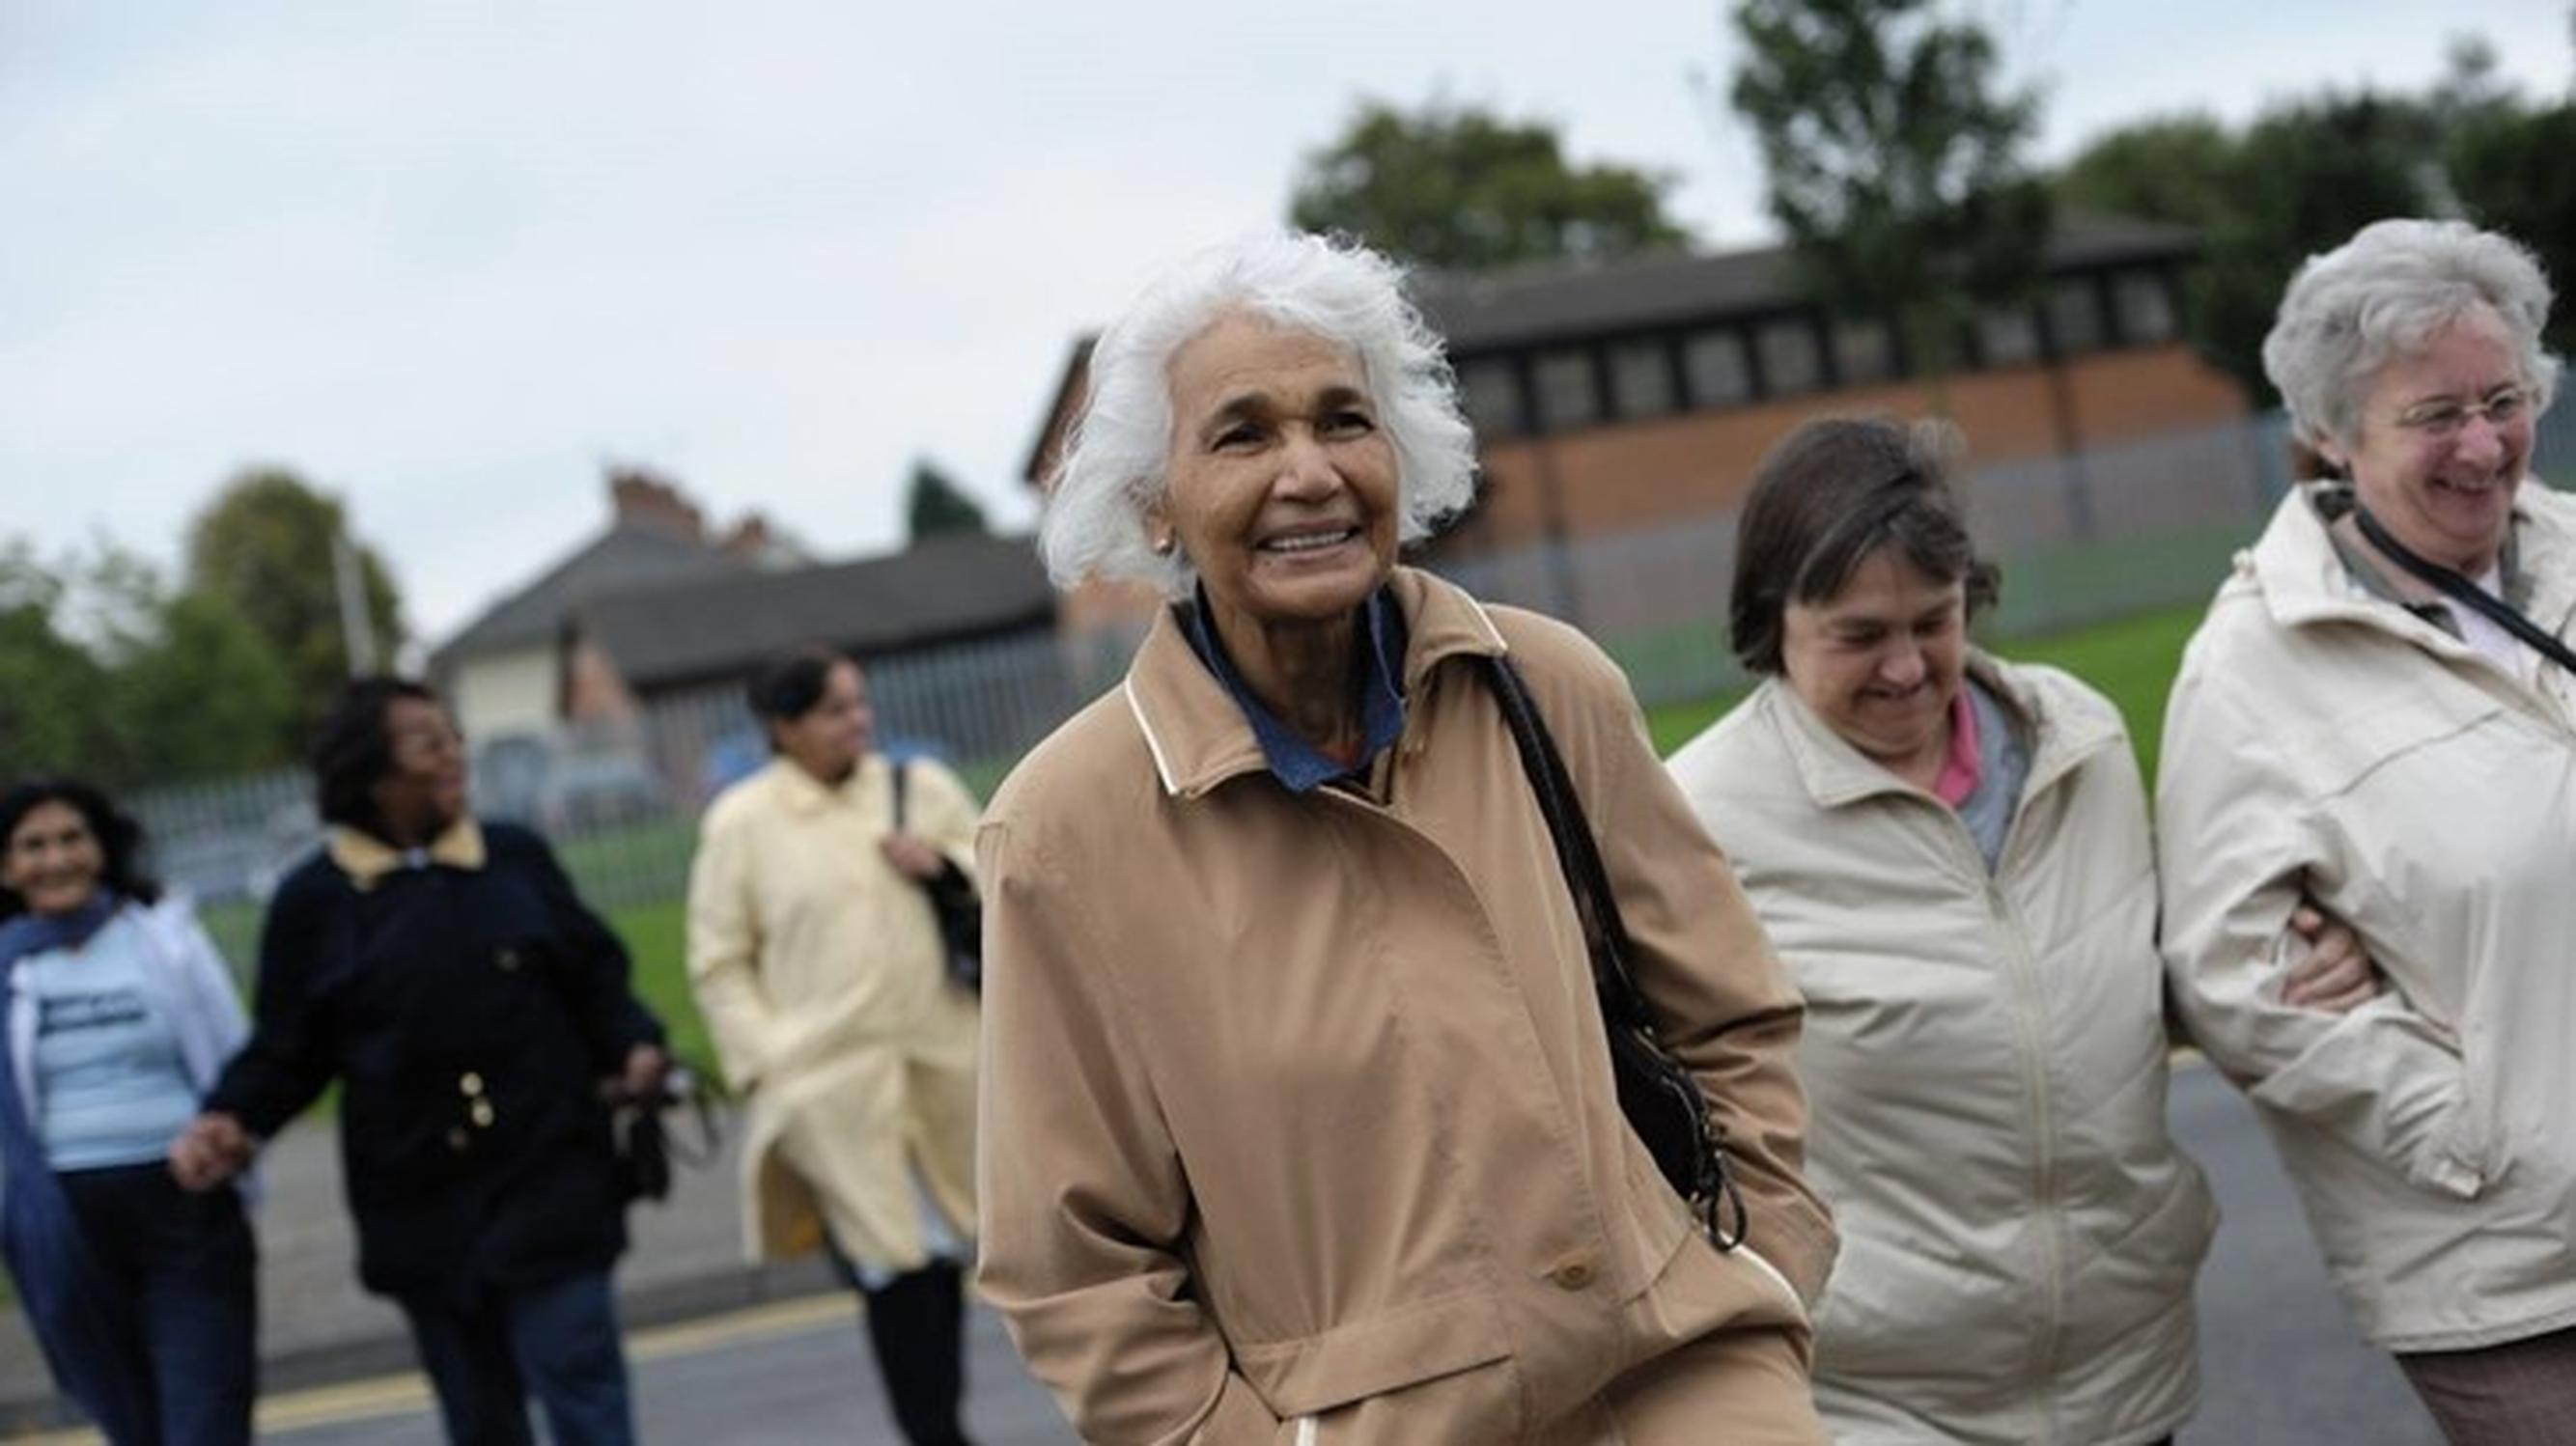 Research by Heriot-Watt University for Sustrans, funded by Transport Scotland, found that older adults valued walking and staying active for their physical, mental and social wellbeing